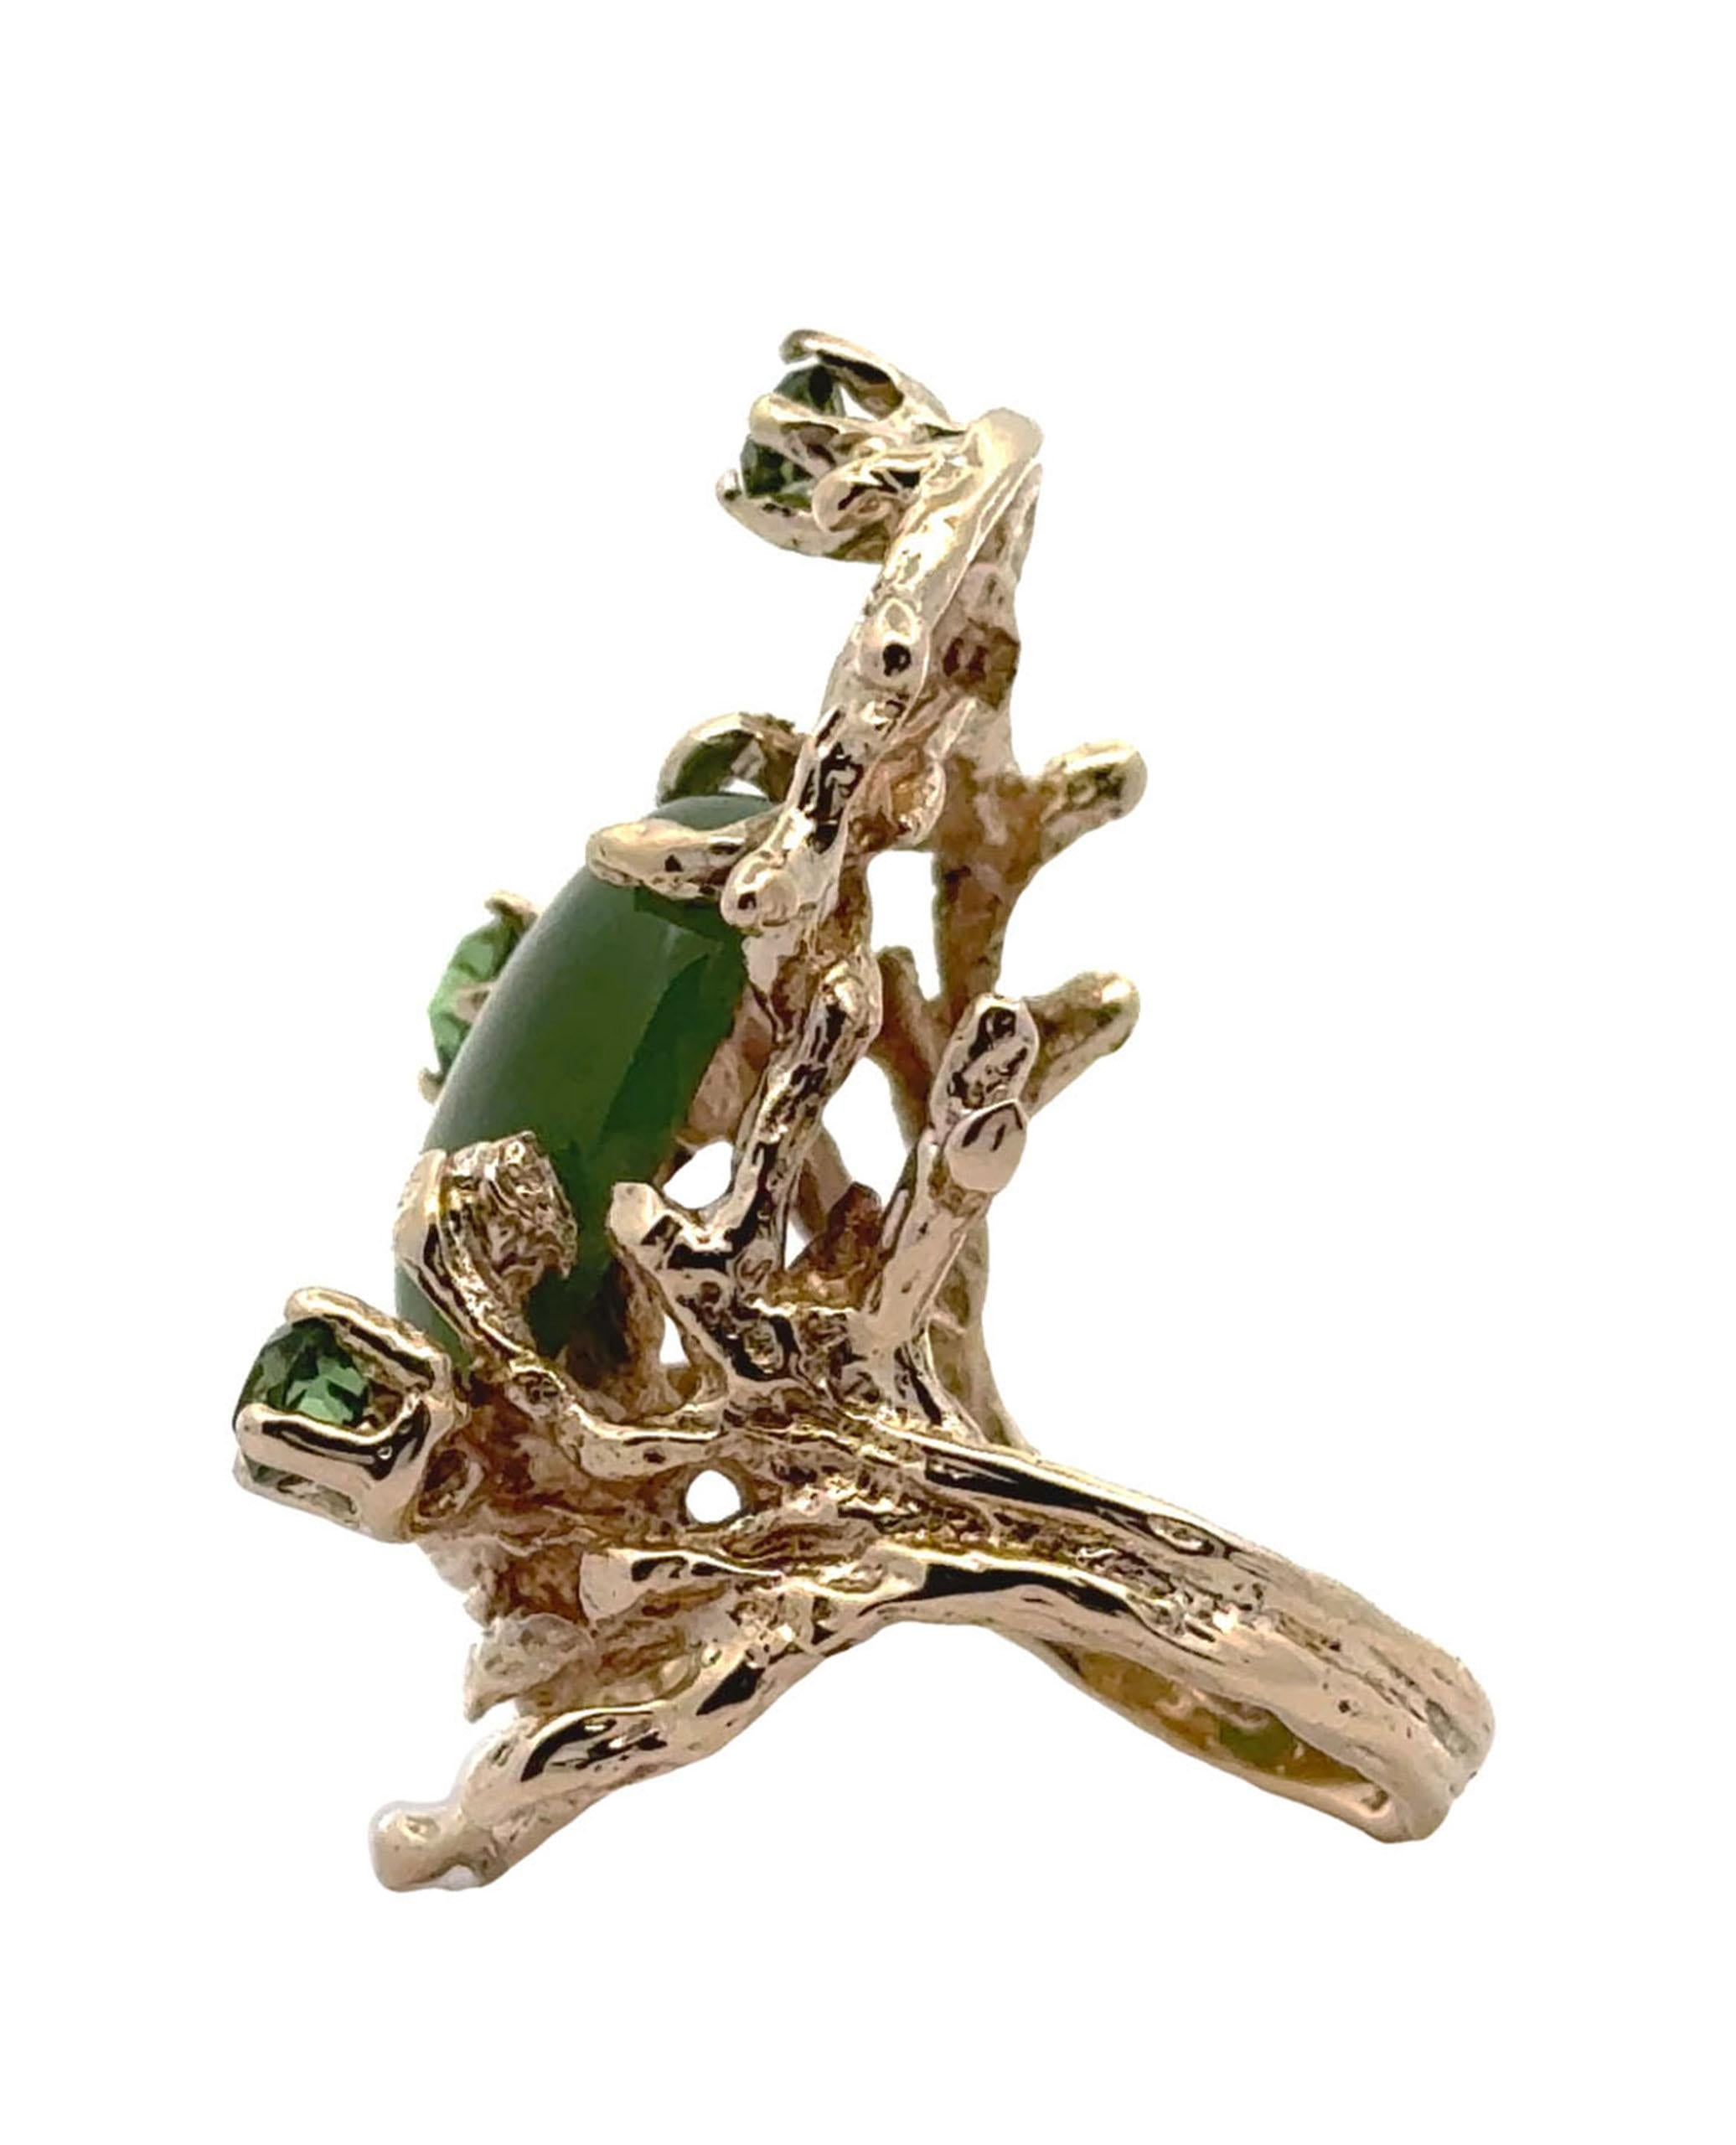 Cabochon Preowned 14K Yellow Gold Organic Style Ring with Jade and Peridot For Sale